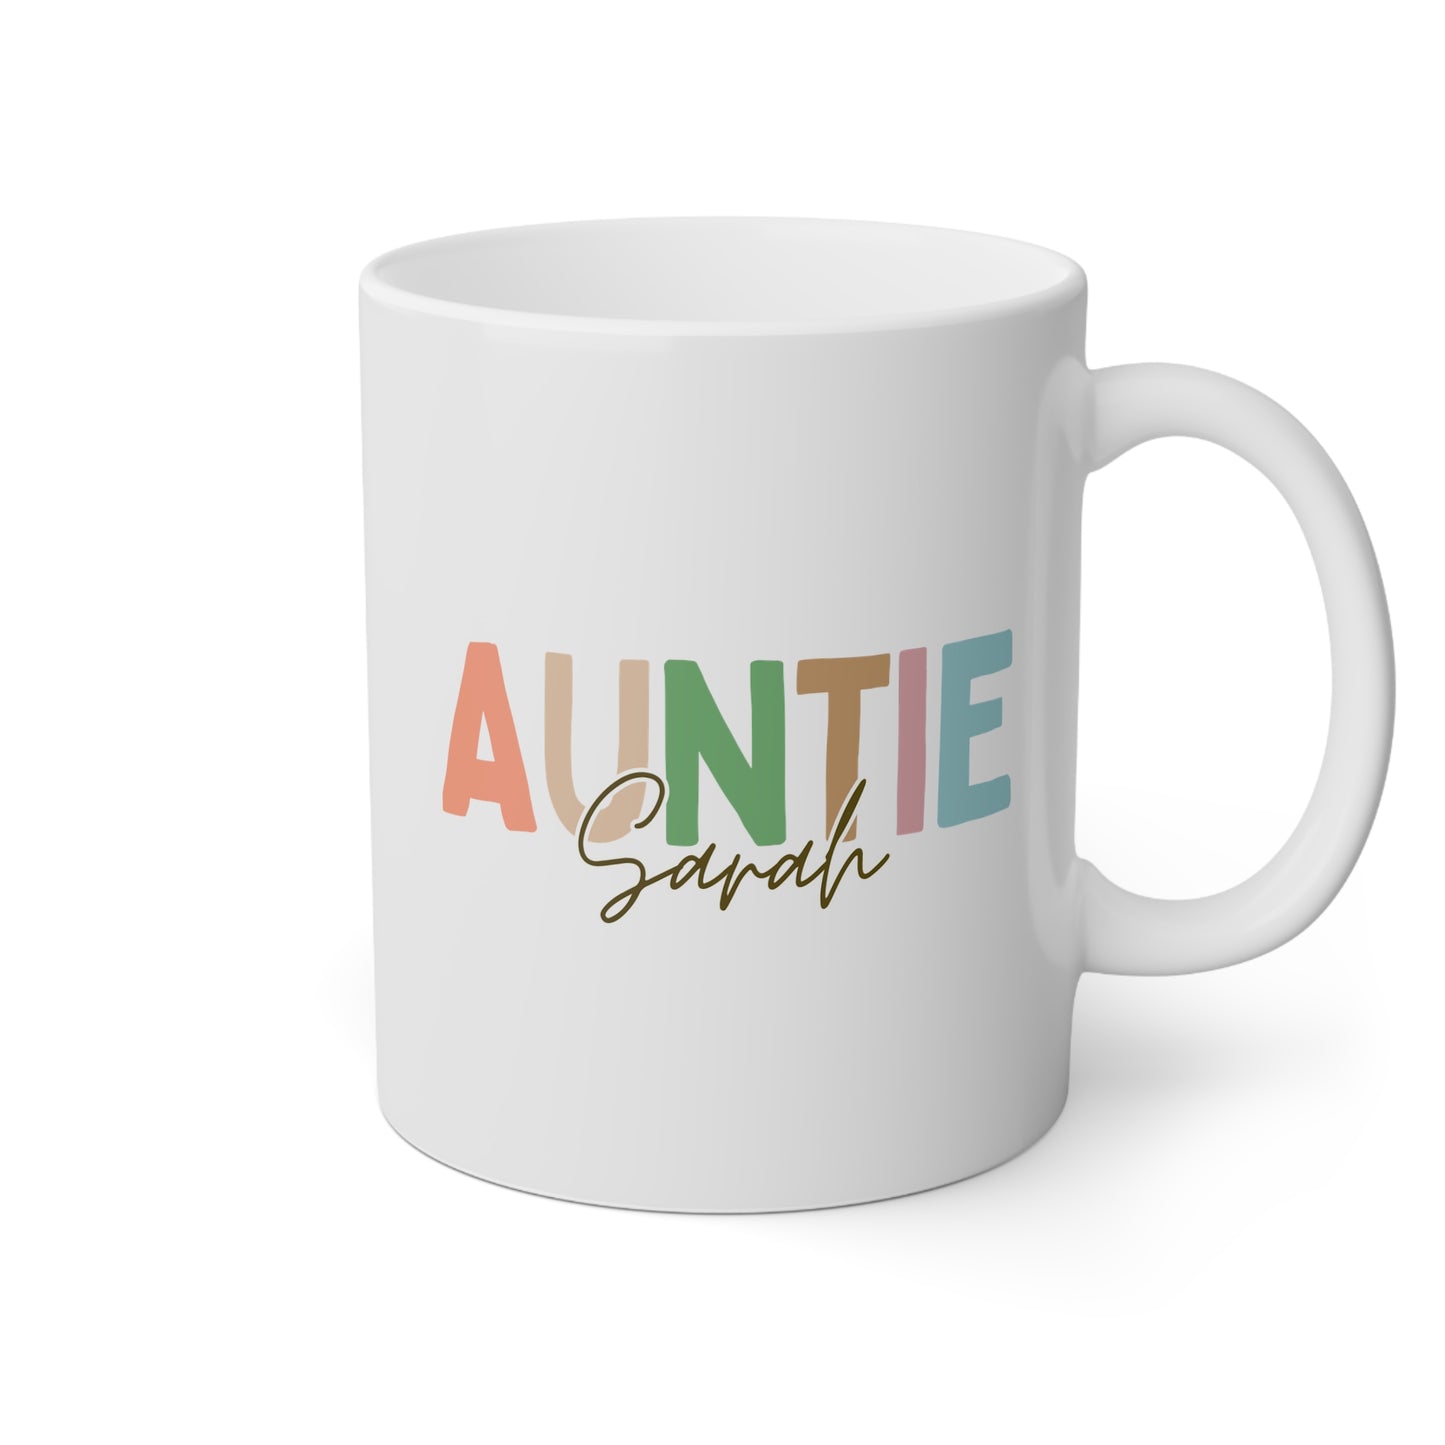 Auntie Name 11oz white funny large coffee mug gift for aunt mothers day birthday cool fun funtie custom name personalize waveywares wavey wares wavywares wavy wares